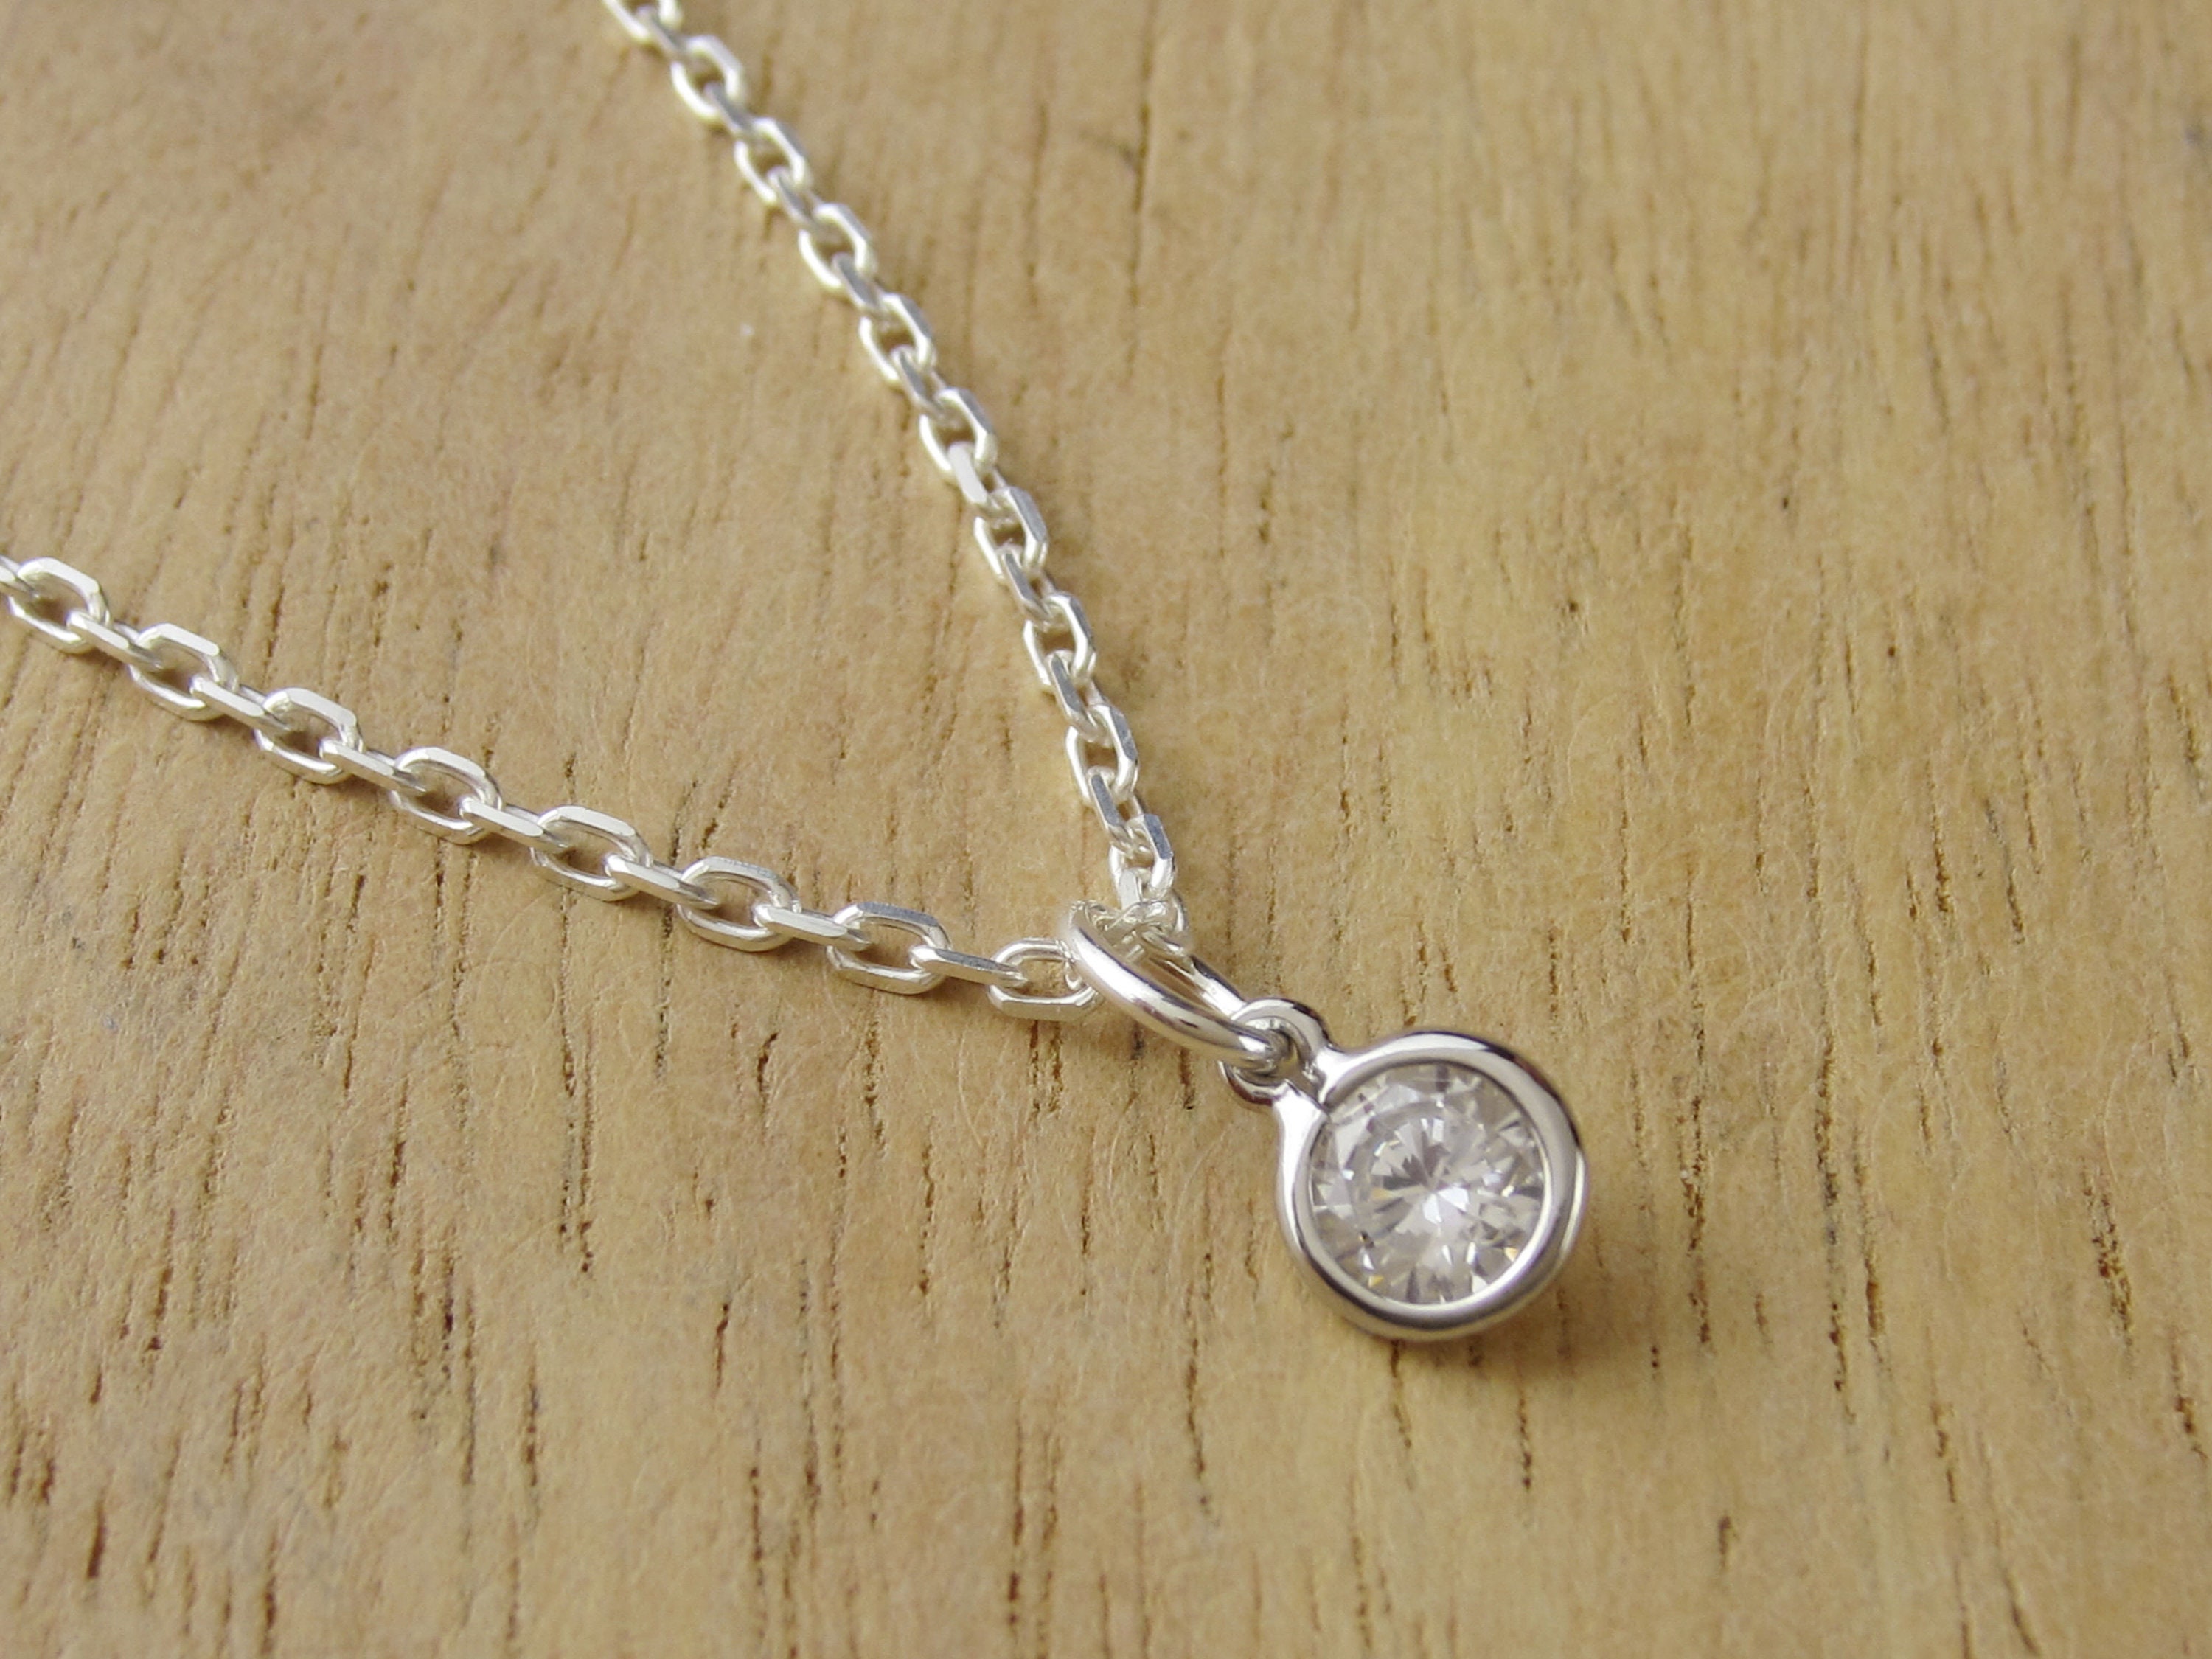 Tiny dot necklace, dainty charm pendant, sterling silver chain